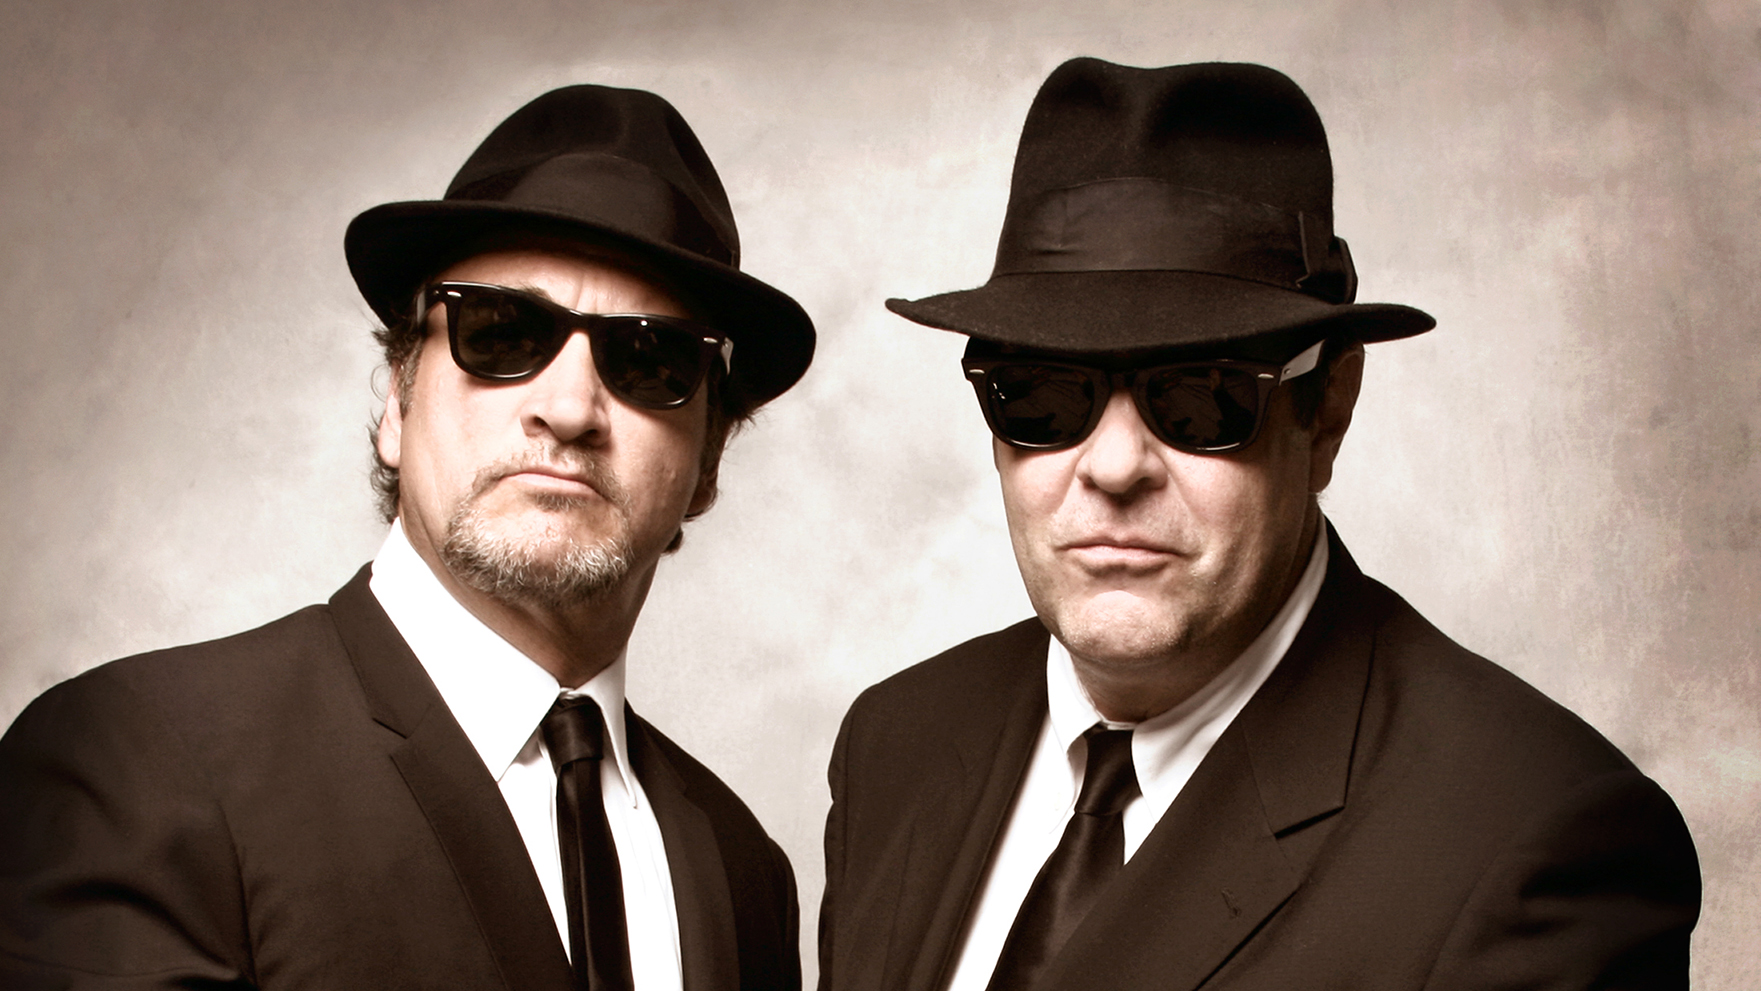 Dynamic Duo: The Blues Brothers Costume